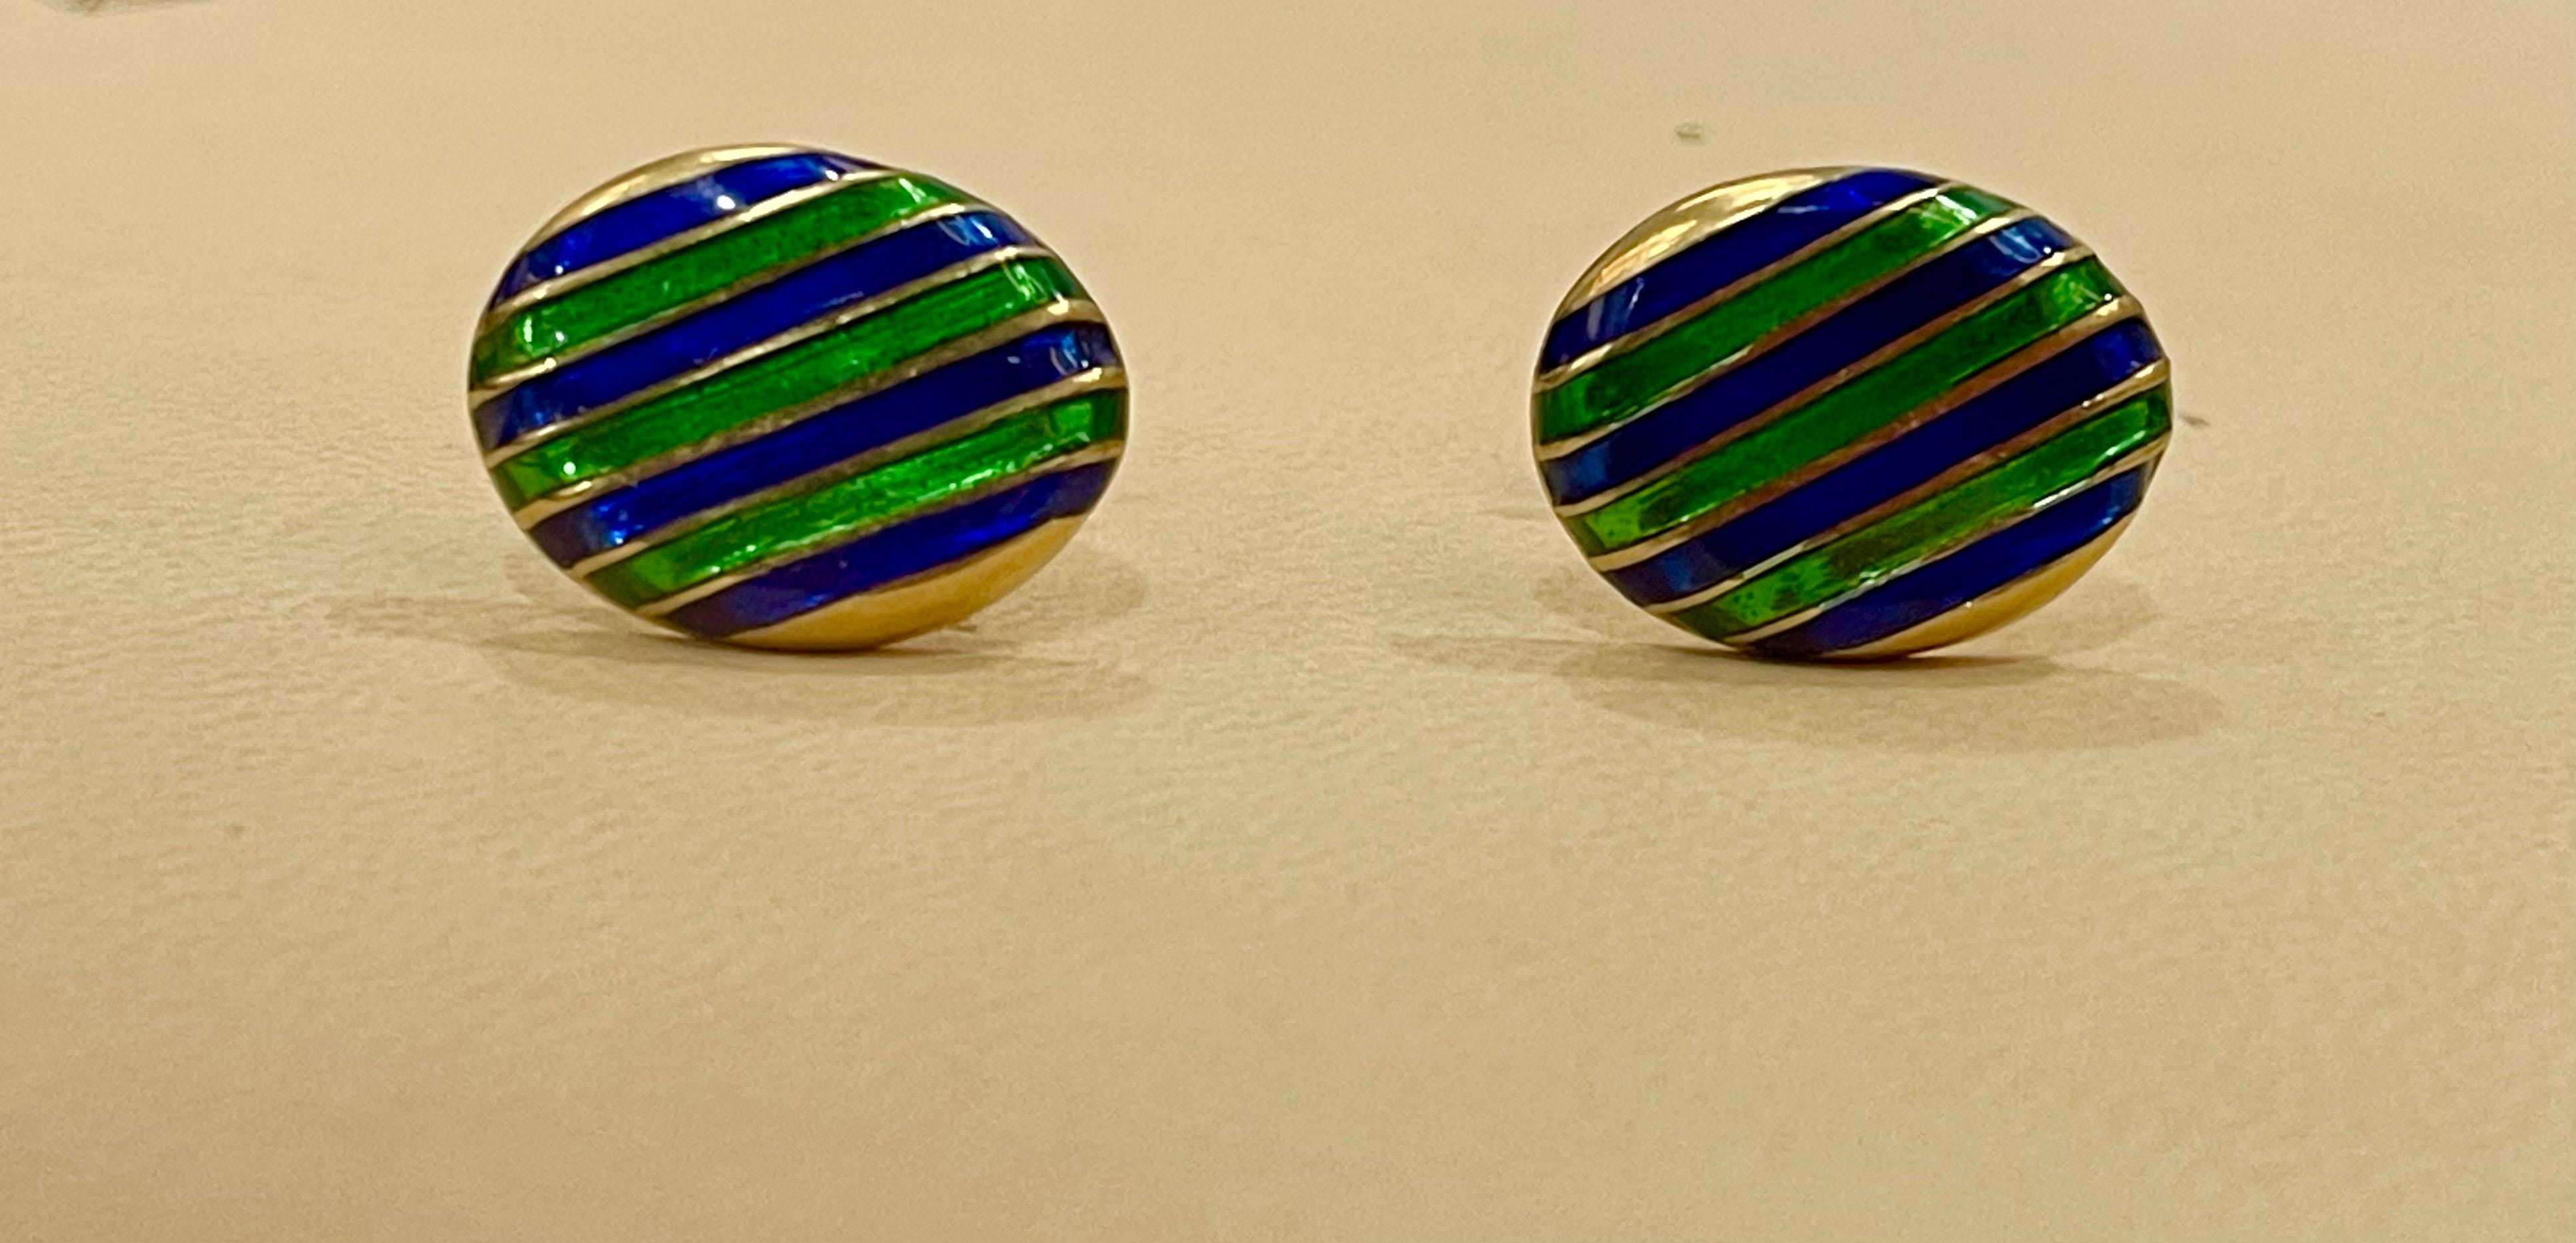 Its Vintage 
Classic cufflinks in high-polished 14 karat yellow gold, with green and blue enamel on them. 
measurements   21 X 16 mm.
14 Karat Yellow gold 
Gold weight 15.5 Gm
Beautiful vintage piece



I did not take professional pictures, all